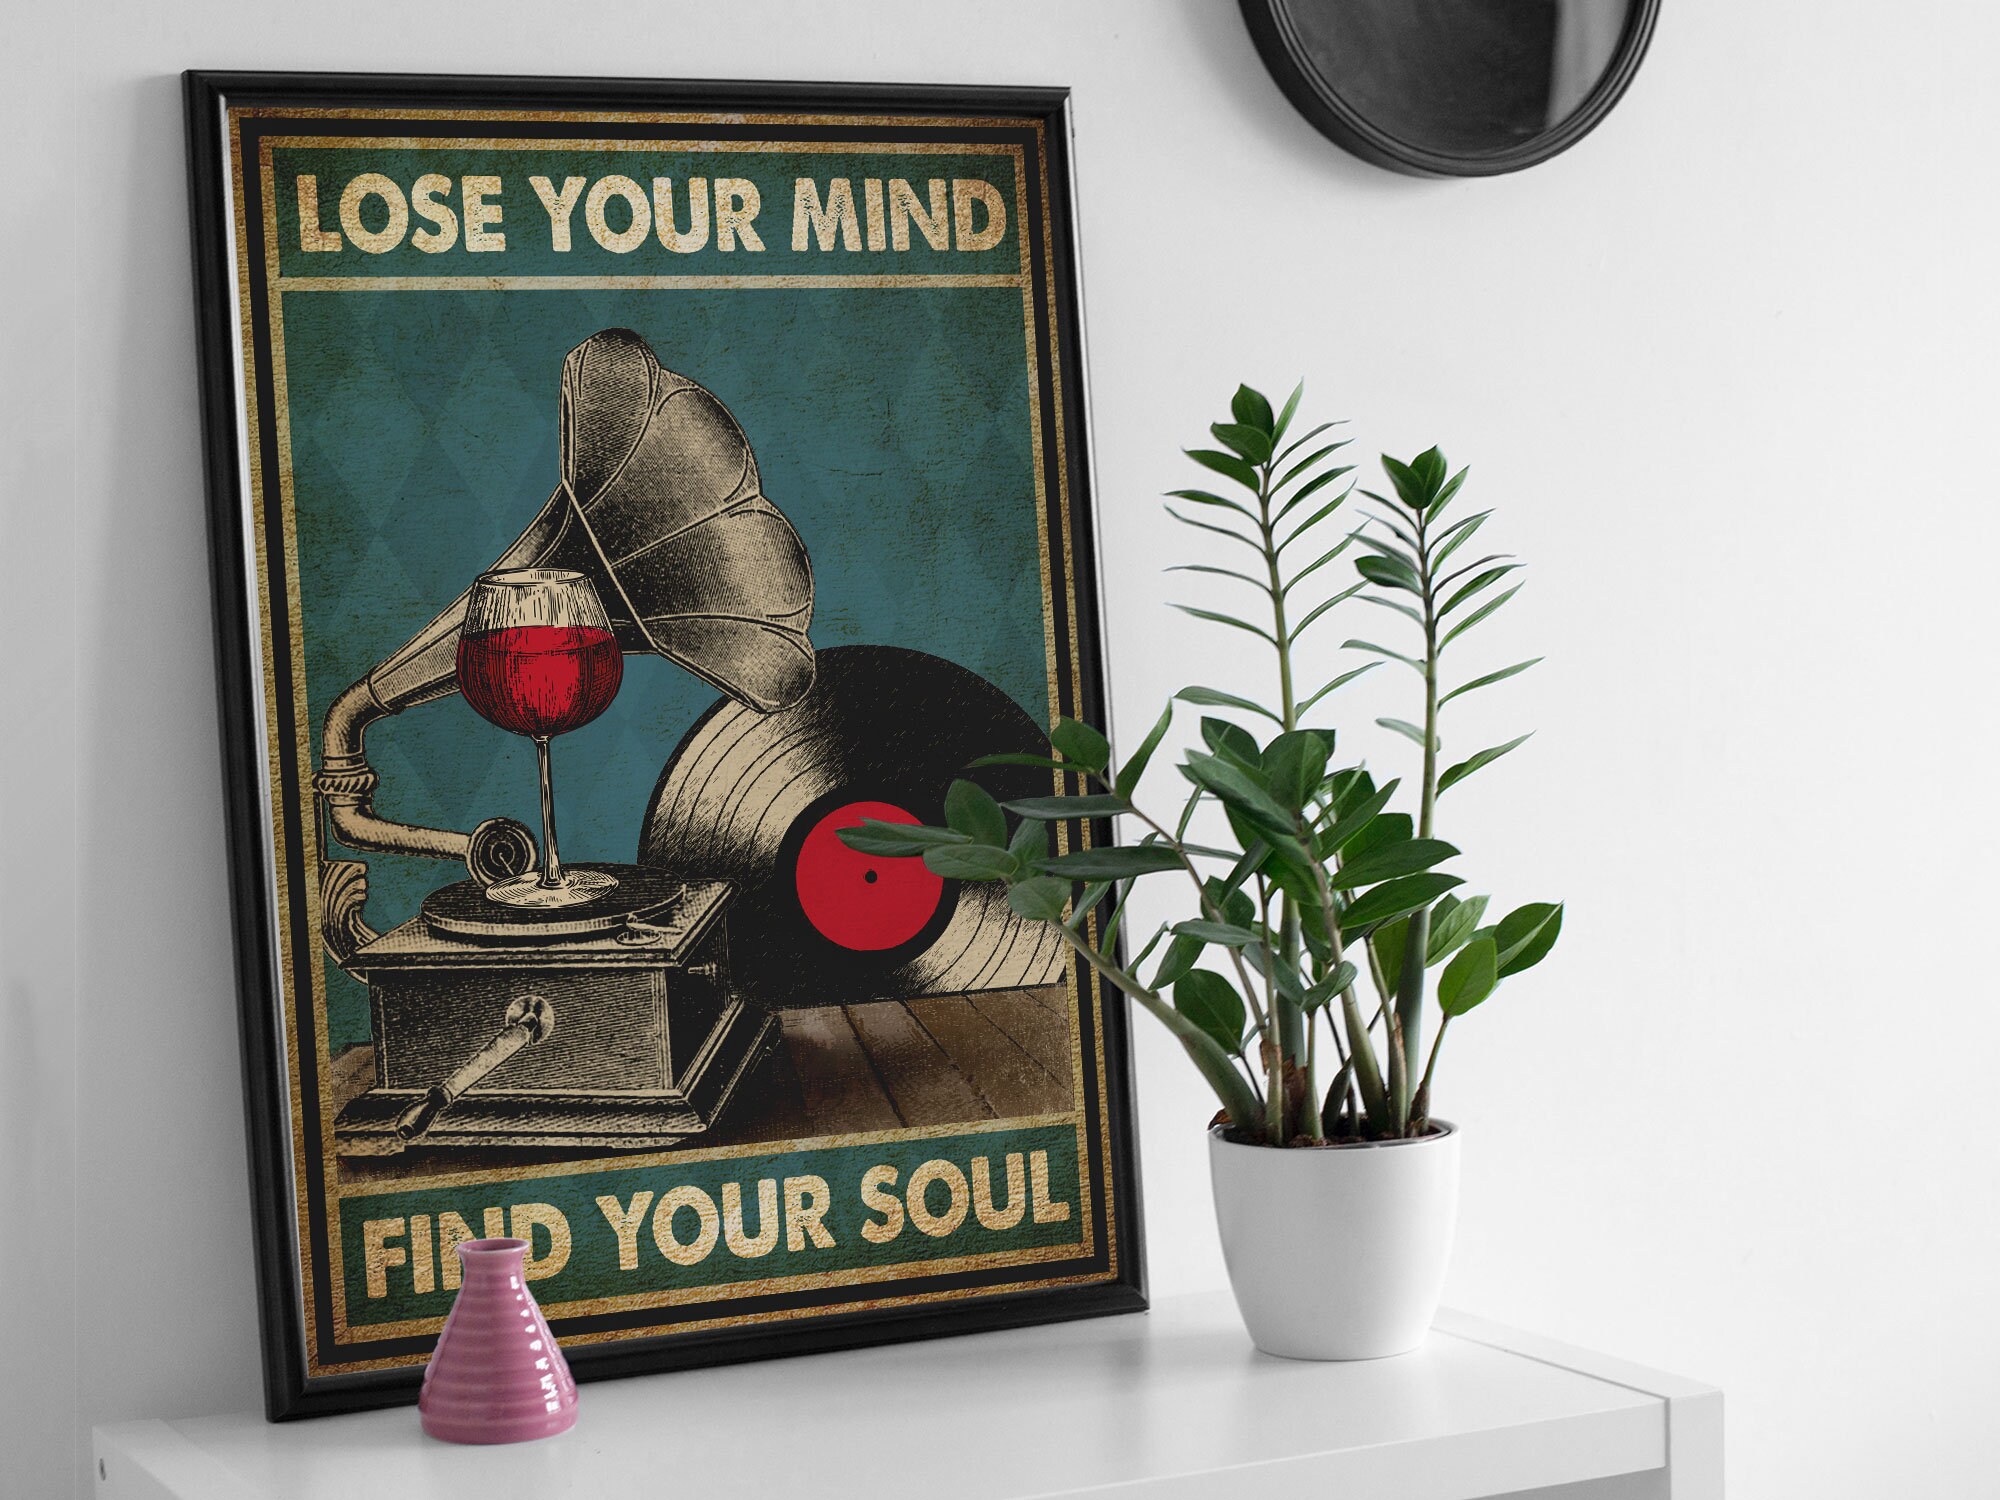 Music Poster Lose your mind find your soul Poster Music Wall | Etsy